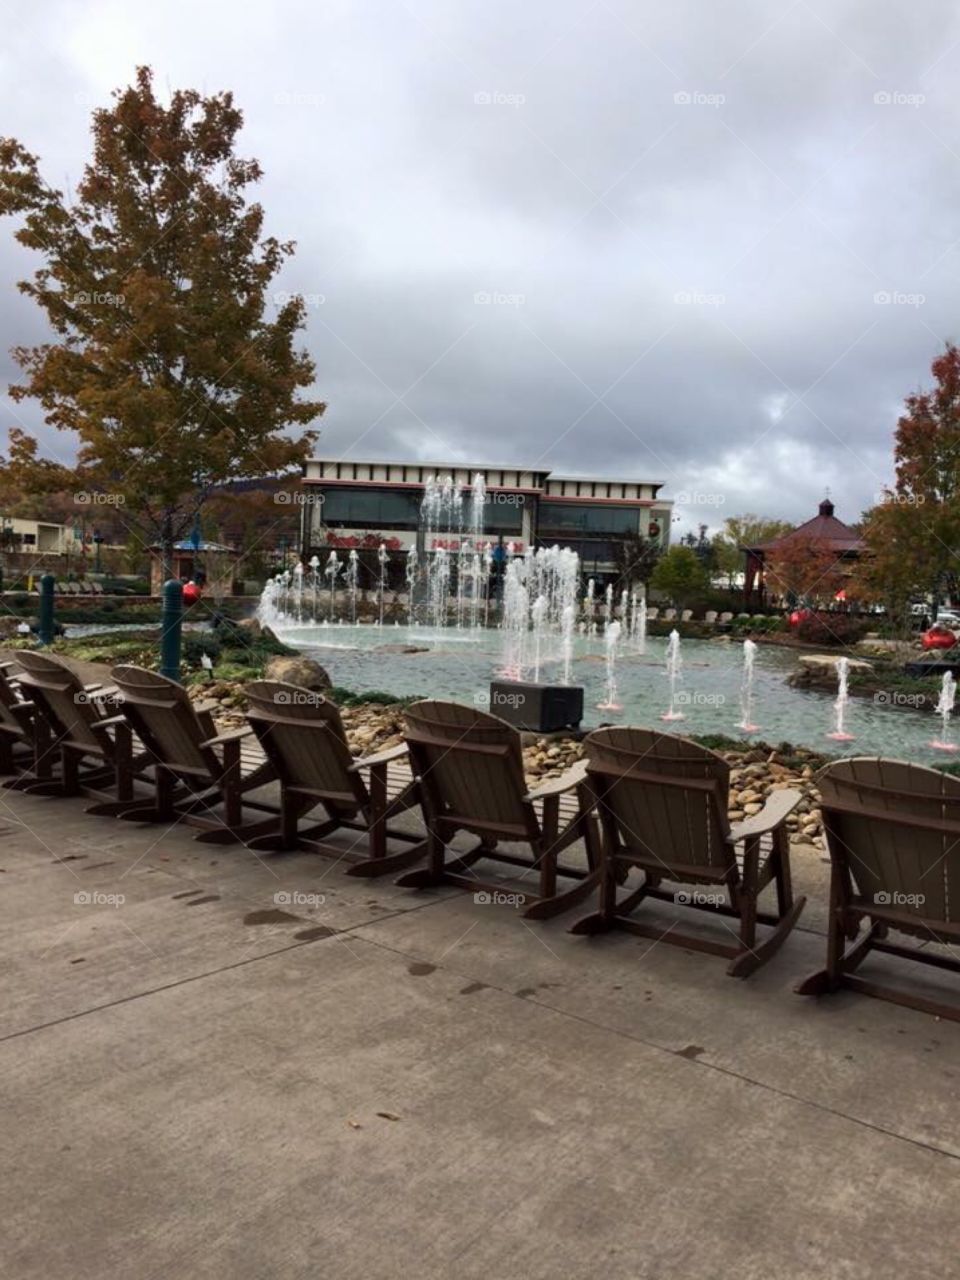 Dancing Fountain in Pigeon Forge